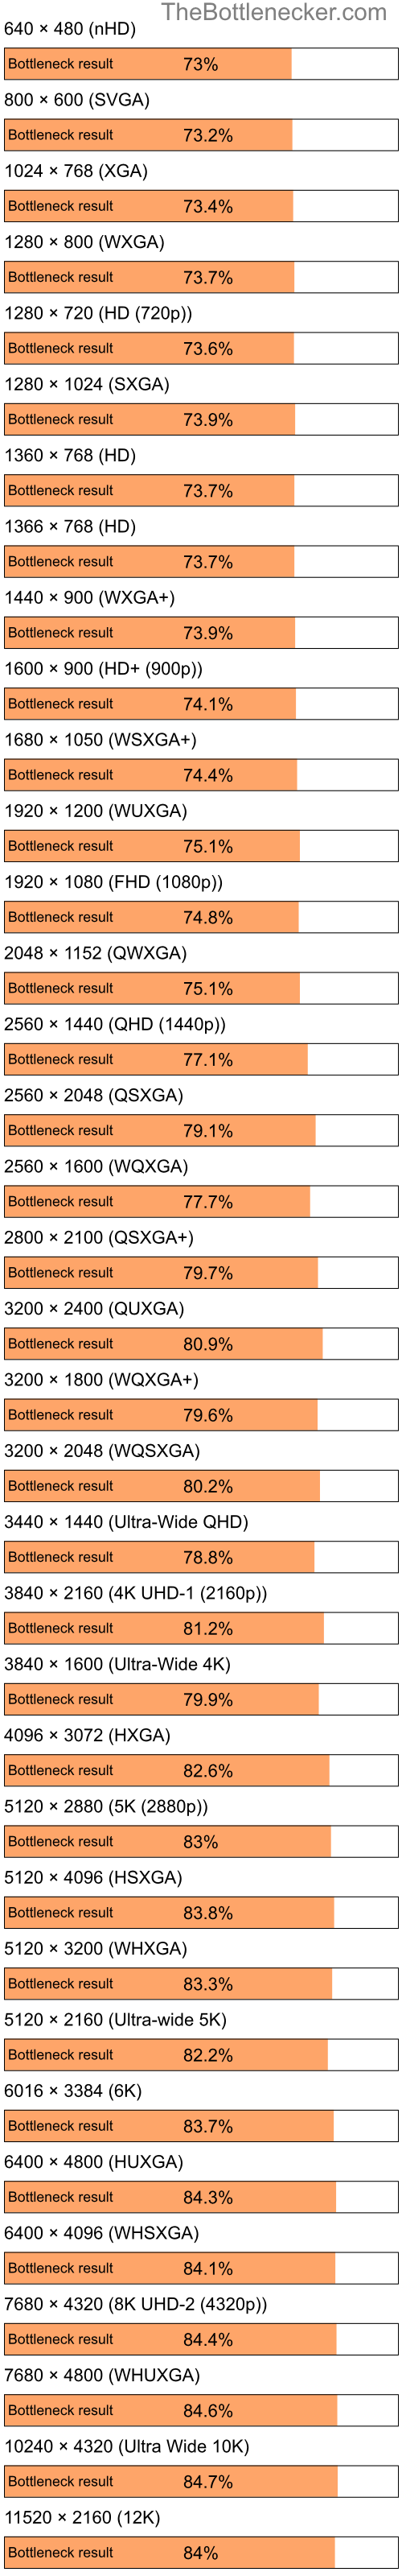 Bottleneck results by resolution for Intel Celeron M 410 and AMD Radeon X700 PRO in Graphic Card Intense Tasks